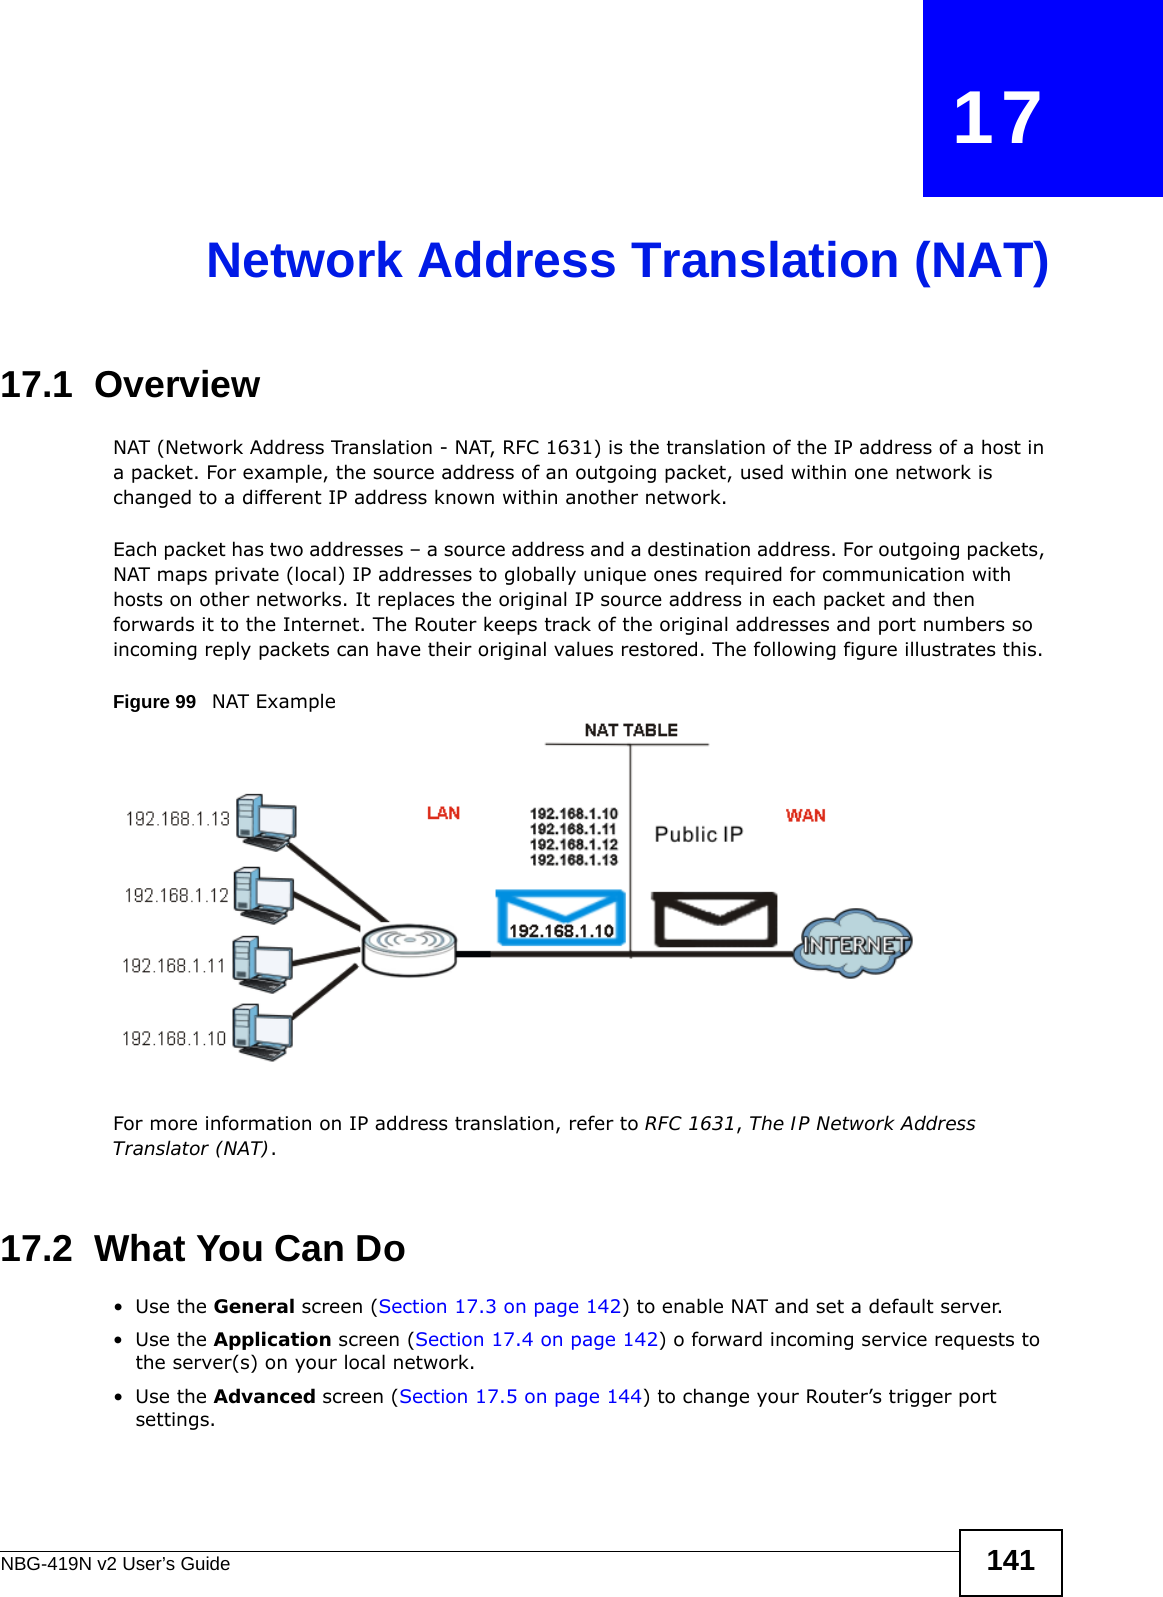 NBG-419N v2 User’s Guide 141CHAPTER   17Network Address Translation (NAT)17.1  Overview   NAT (Network Address Translation - NAT, RFC 1631) is the translation of the IP address of a host in a packet. For example, the source address of an outgoing packet, used within one network is changed to a different IP address known within another network.Each packet has two addresses – a source address and a destination address. For outgoing packets, NAT maps private (local) IP addresses to globally unique ones required for communication with hosts on other networks. It replaces the original IP source address in each packet and then forwards it to the Internet. The Router keeps track of the original addresses and port numbers so incoming reply packets can have their original values restored. The following figure illustrates this.Figure 99   NAT ExampleFor more information on IP address translation, refer to RFC 1631, The IP Network Address Translator (NAT).17.2  What You Can Do•Use the General screen (Section 17.3 on page 142) to enable NAT and set a default server.•Use the Application screen (Section 17.4 on page 142) o forward incoming service requests to the server(s) on your local network.•Use the Advanced screen (Section 17.5 on page 144) to change your Router’s trigger port settings.